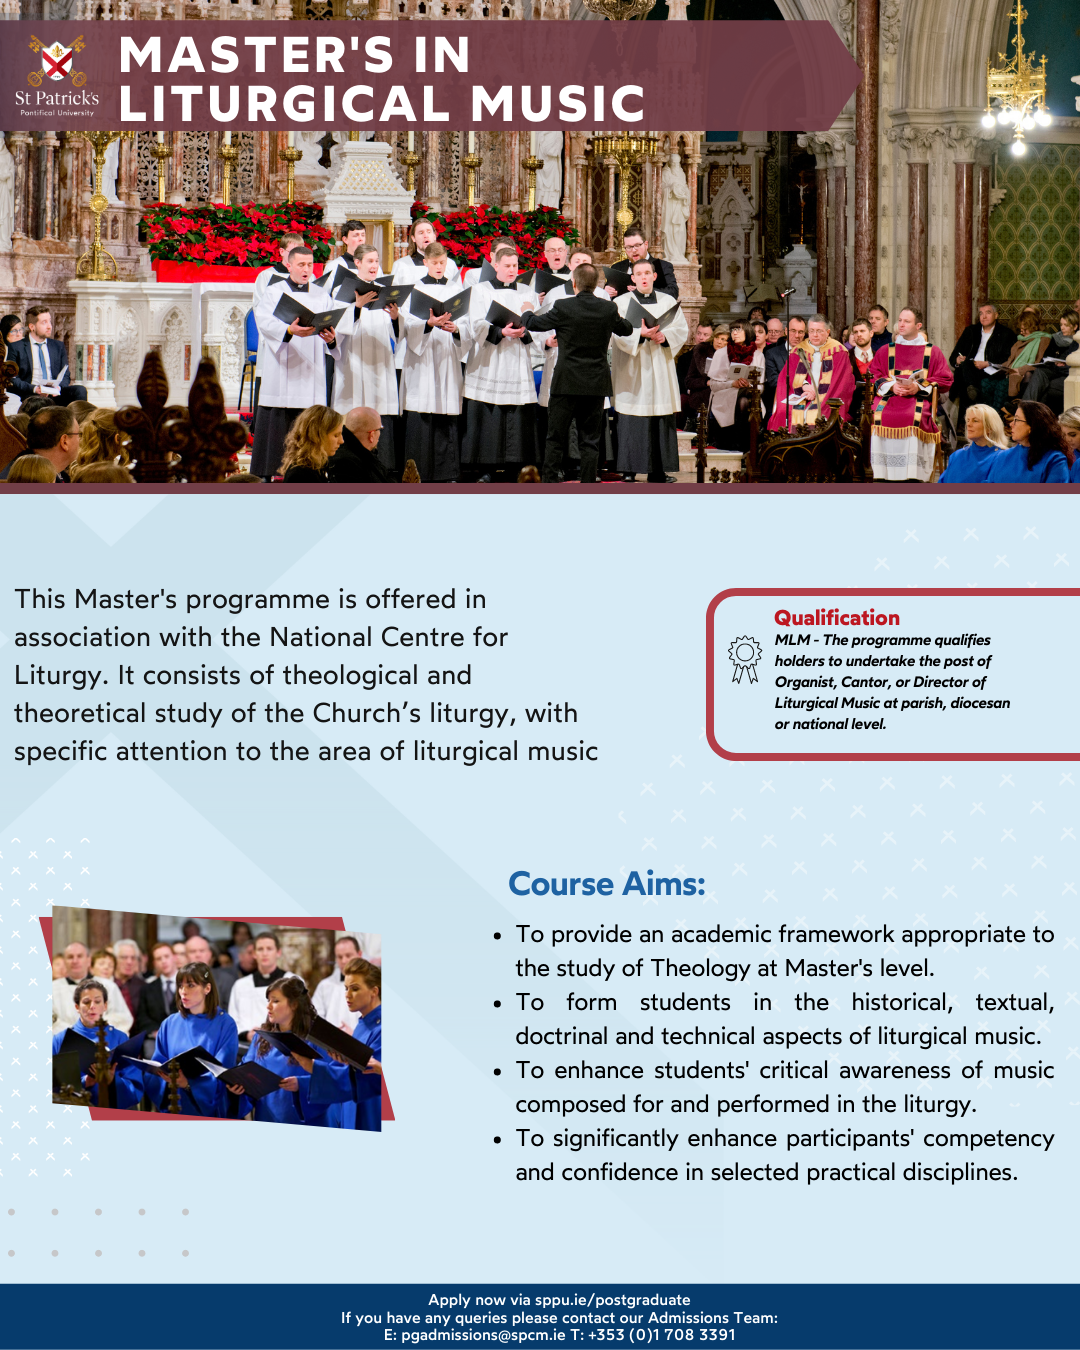 Masters-in-Liturgical-Music-Instagram-Post-Portrait.png#asset:14291